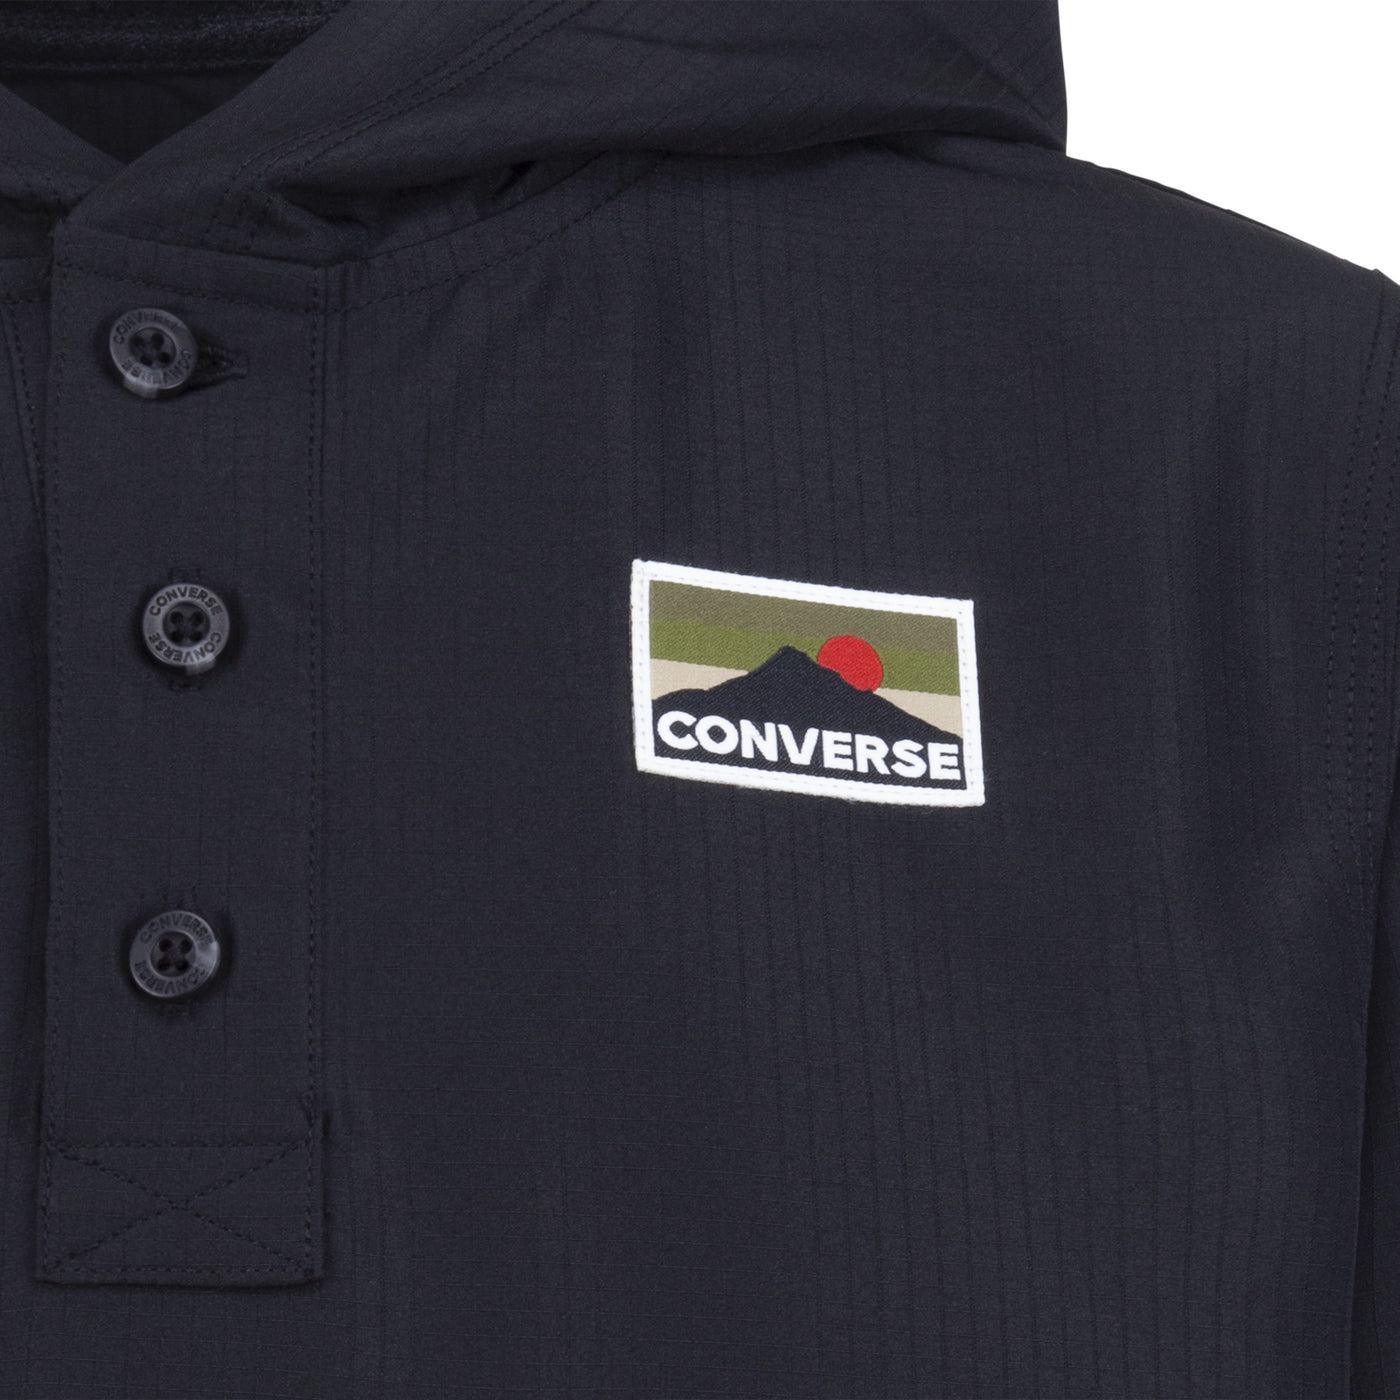 Converse Black Geared Up Layering Pullover